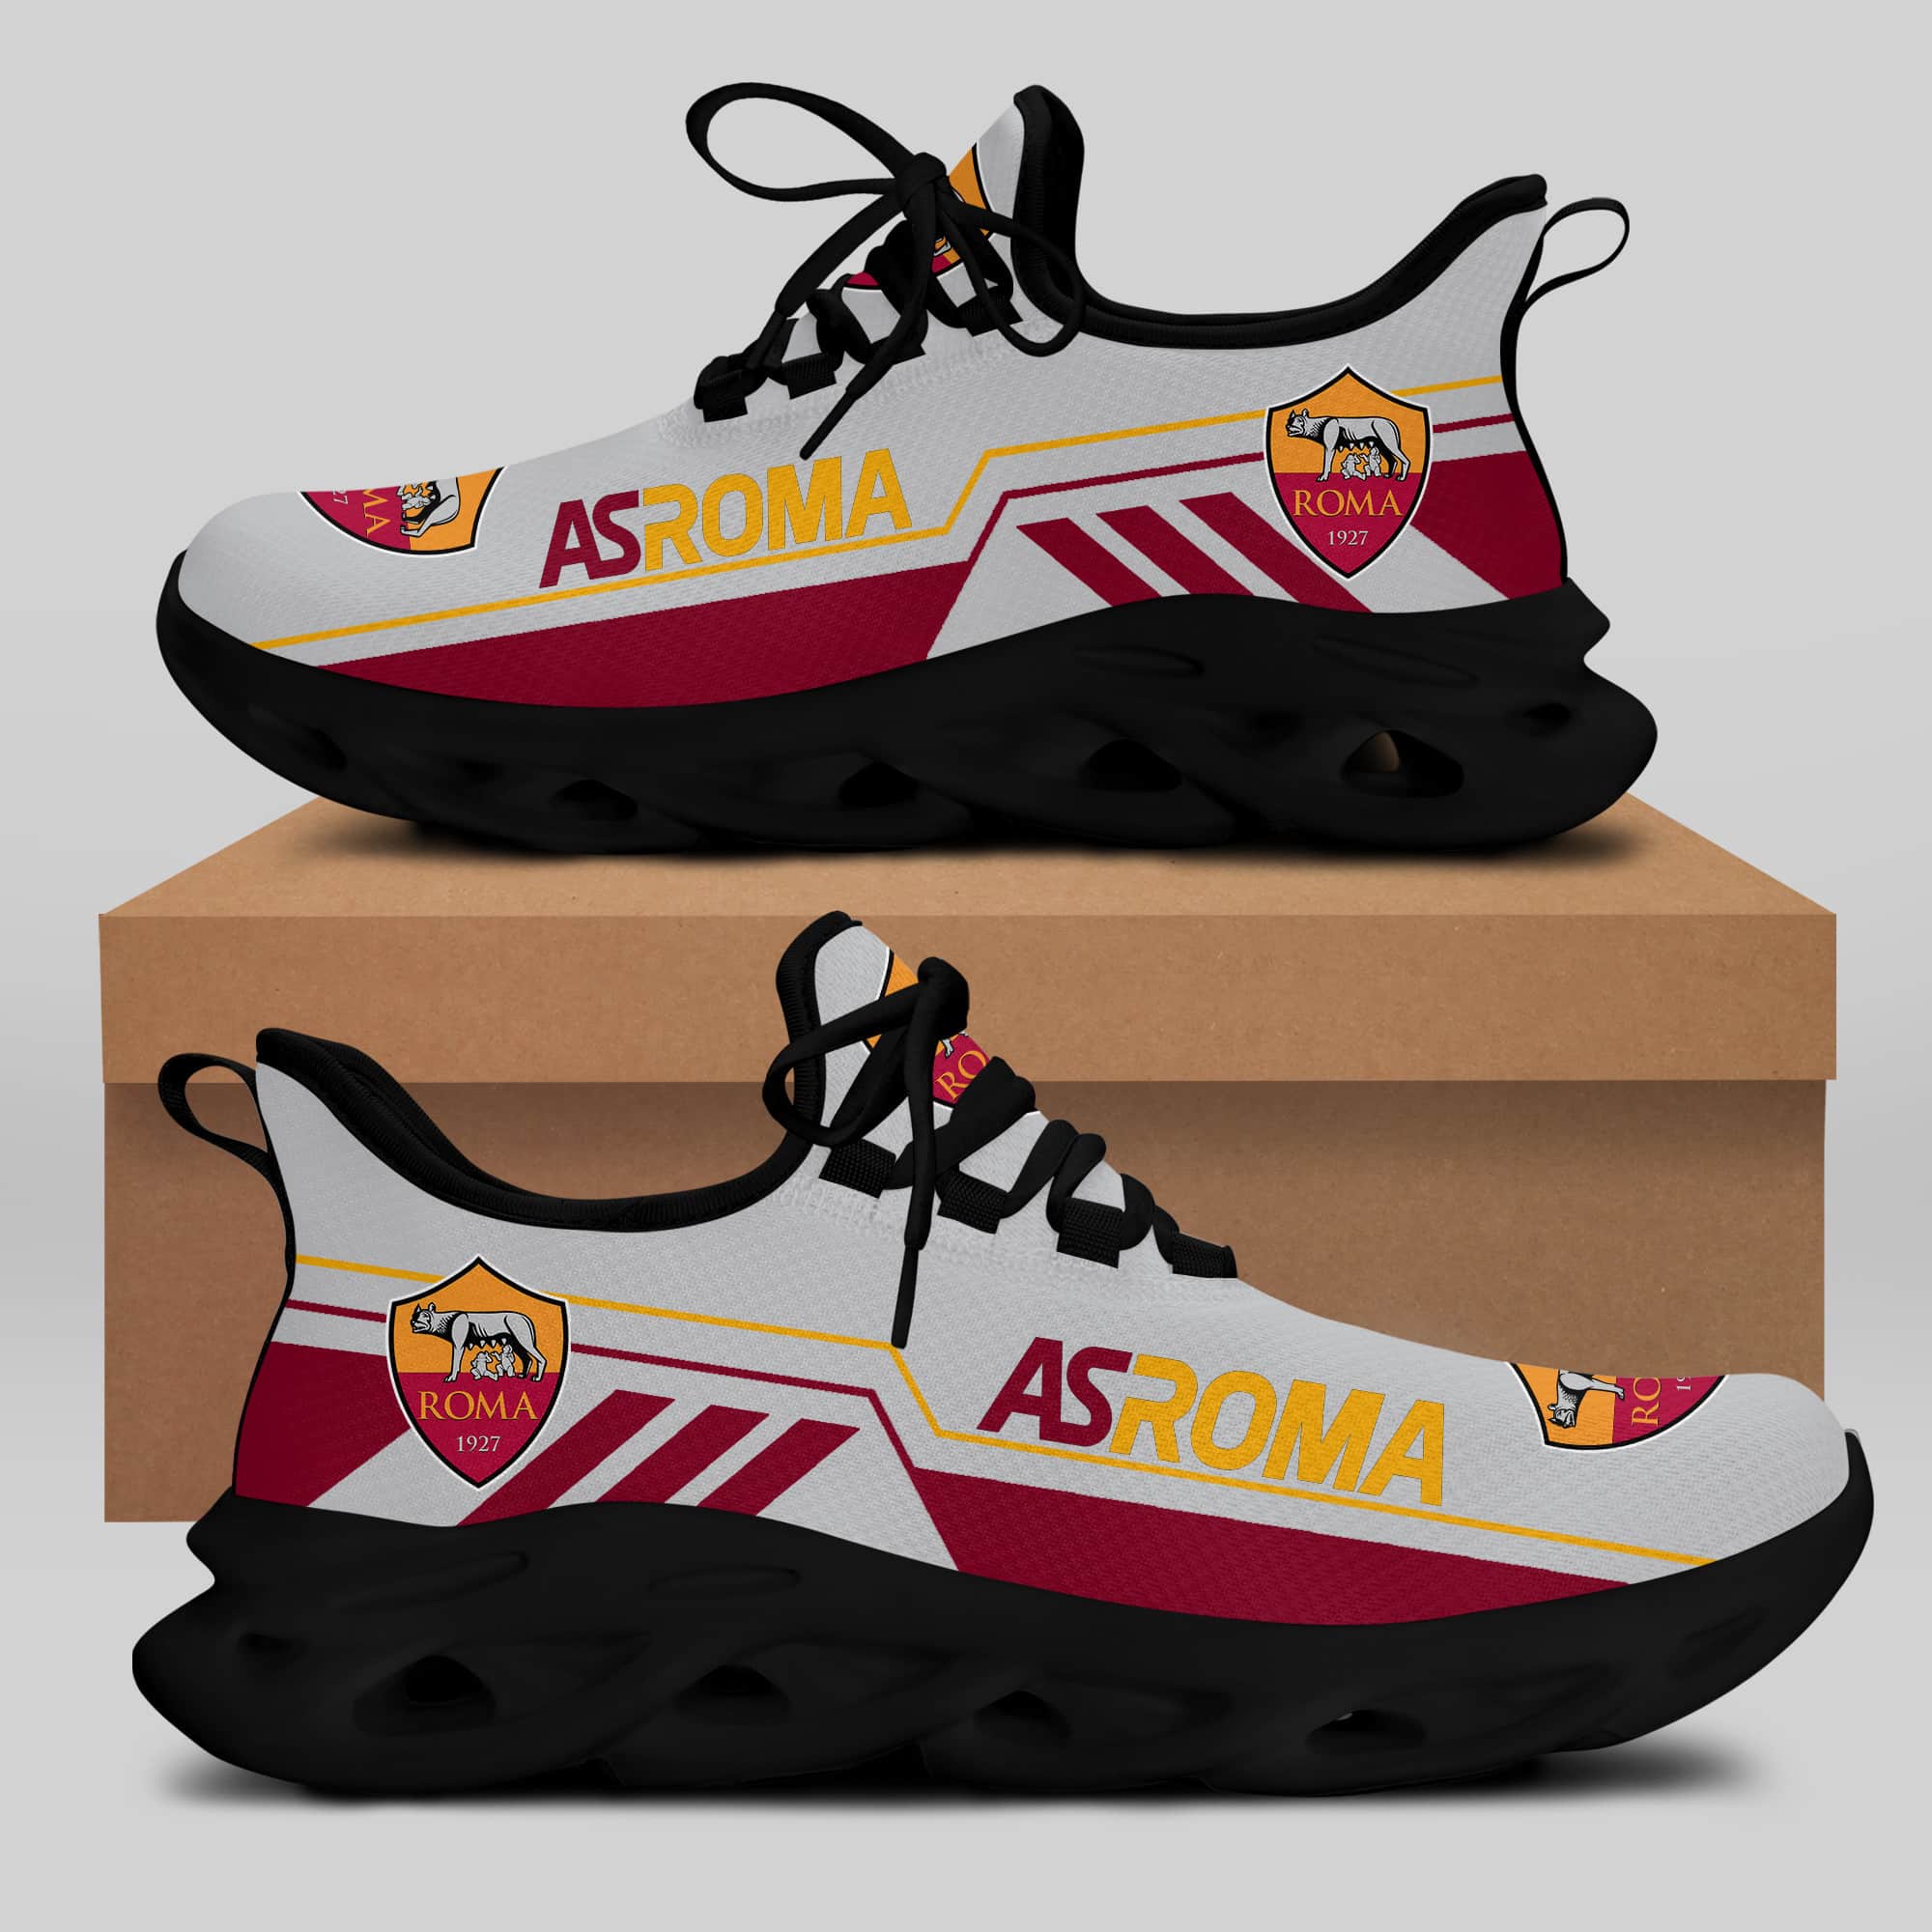 As Roma Running Shoes Max Soul Shoes Sneakers Ver 9 1